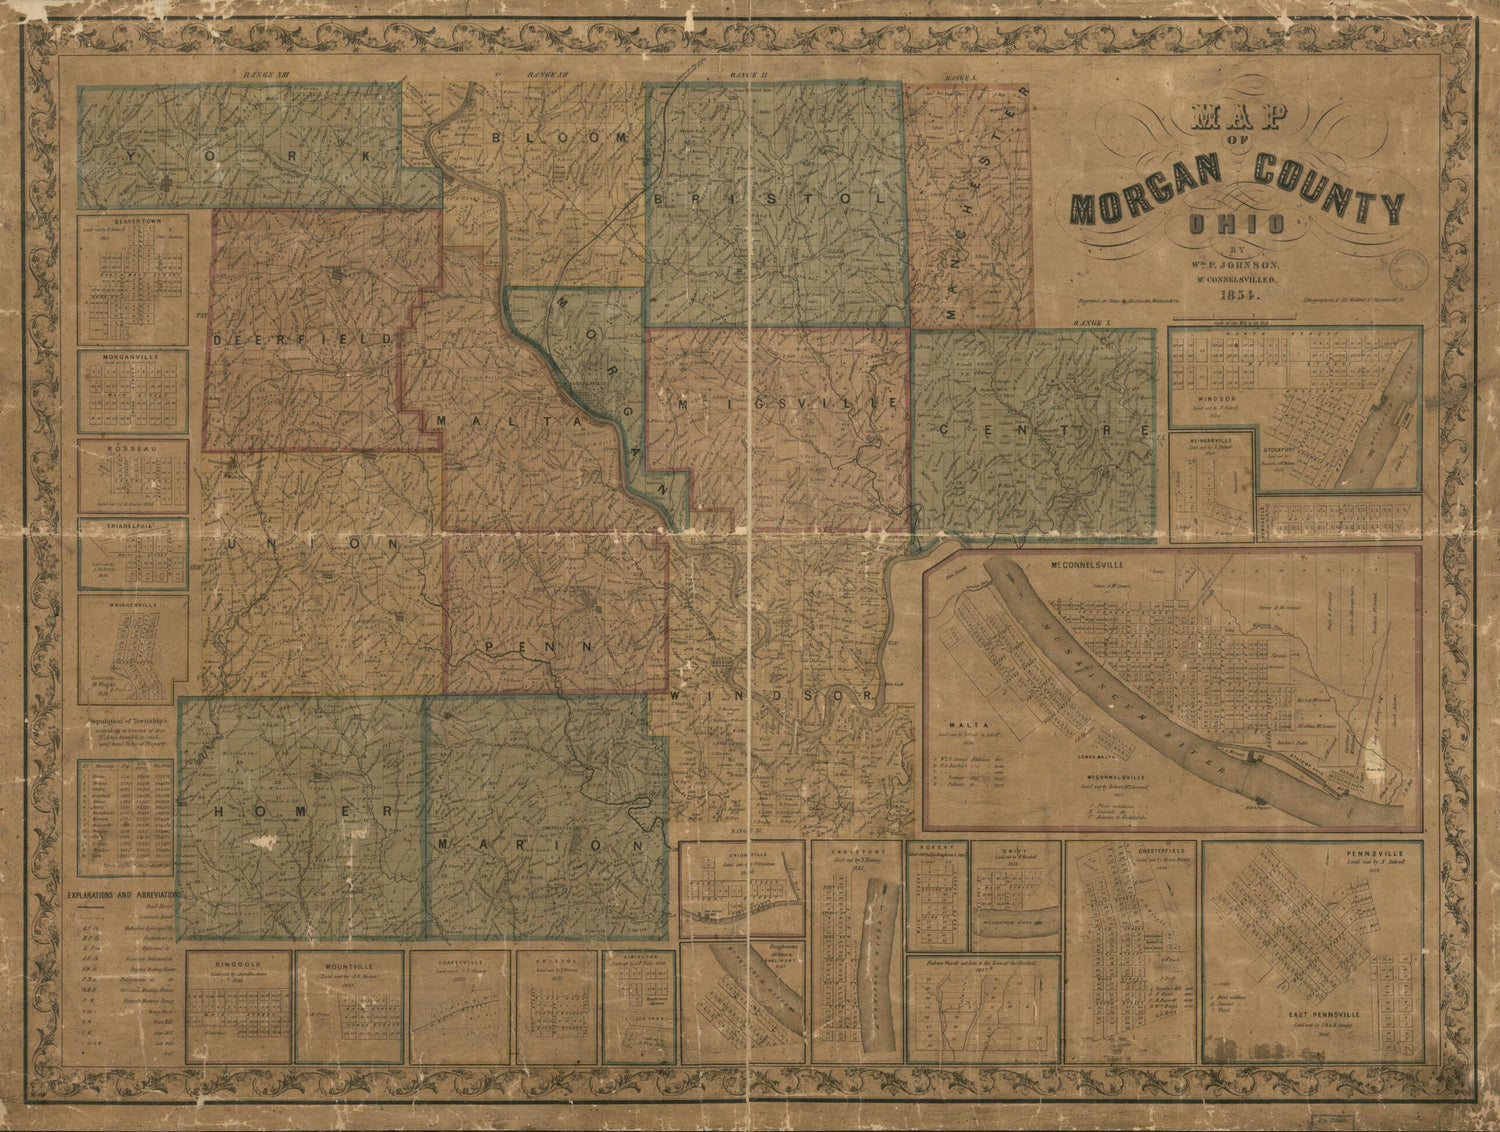 This old map of Map of Morgan County, Ohio from 1854 was created by Wm. P. Johnson, Wallace &amp; Co Middleton in 1854